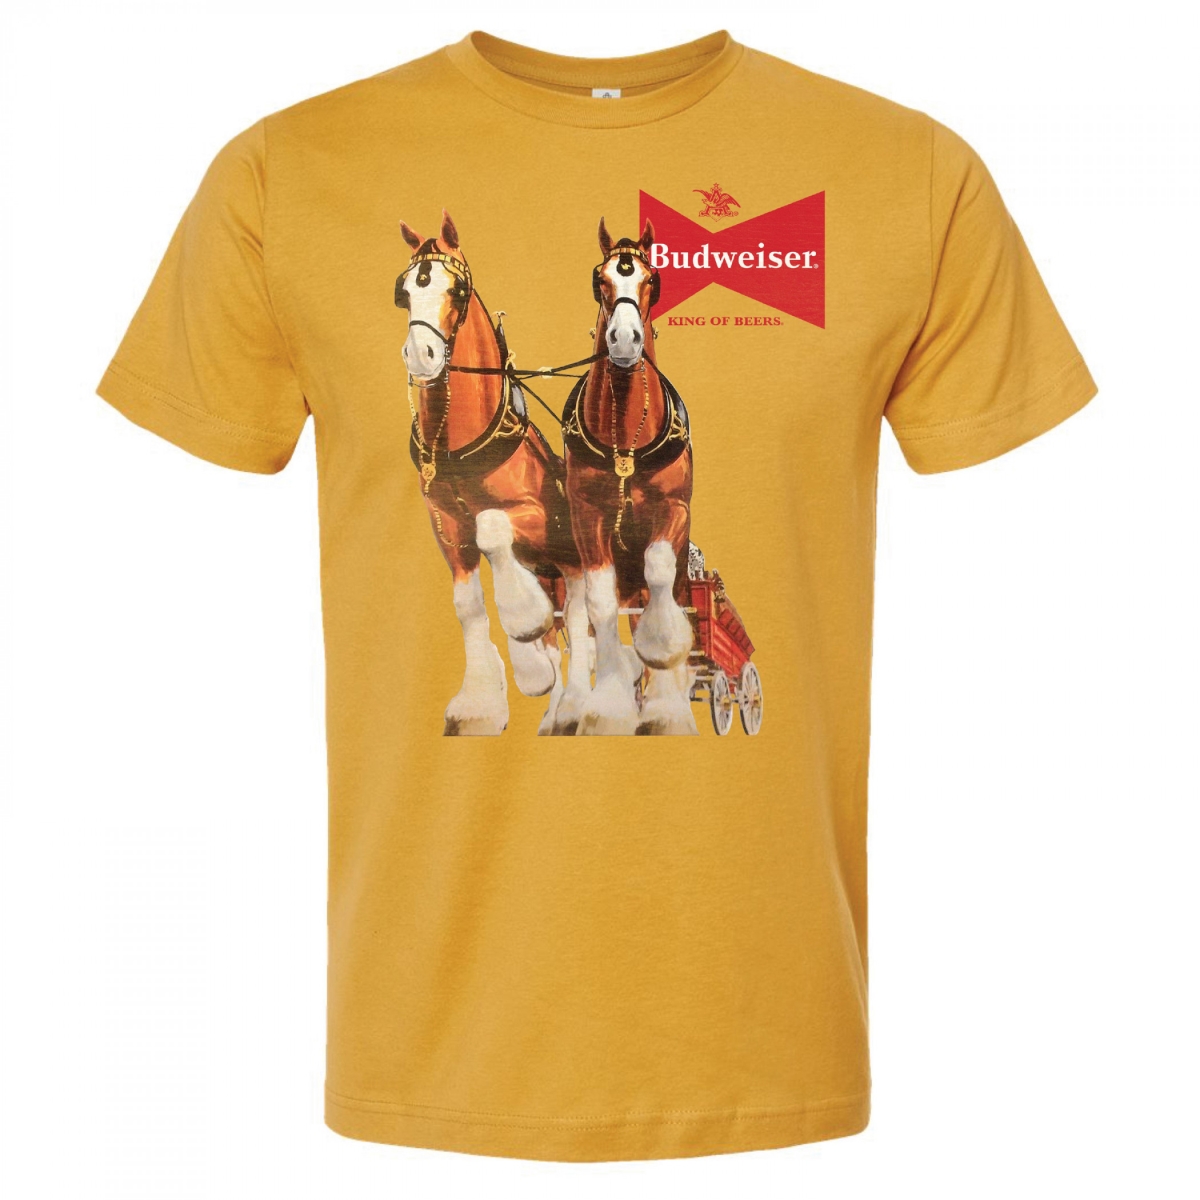 863880-xlarge  Clydesdales Gold Colorway Cotton T-Shirt, Gold - Extra Large -  Budweiser